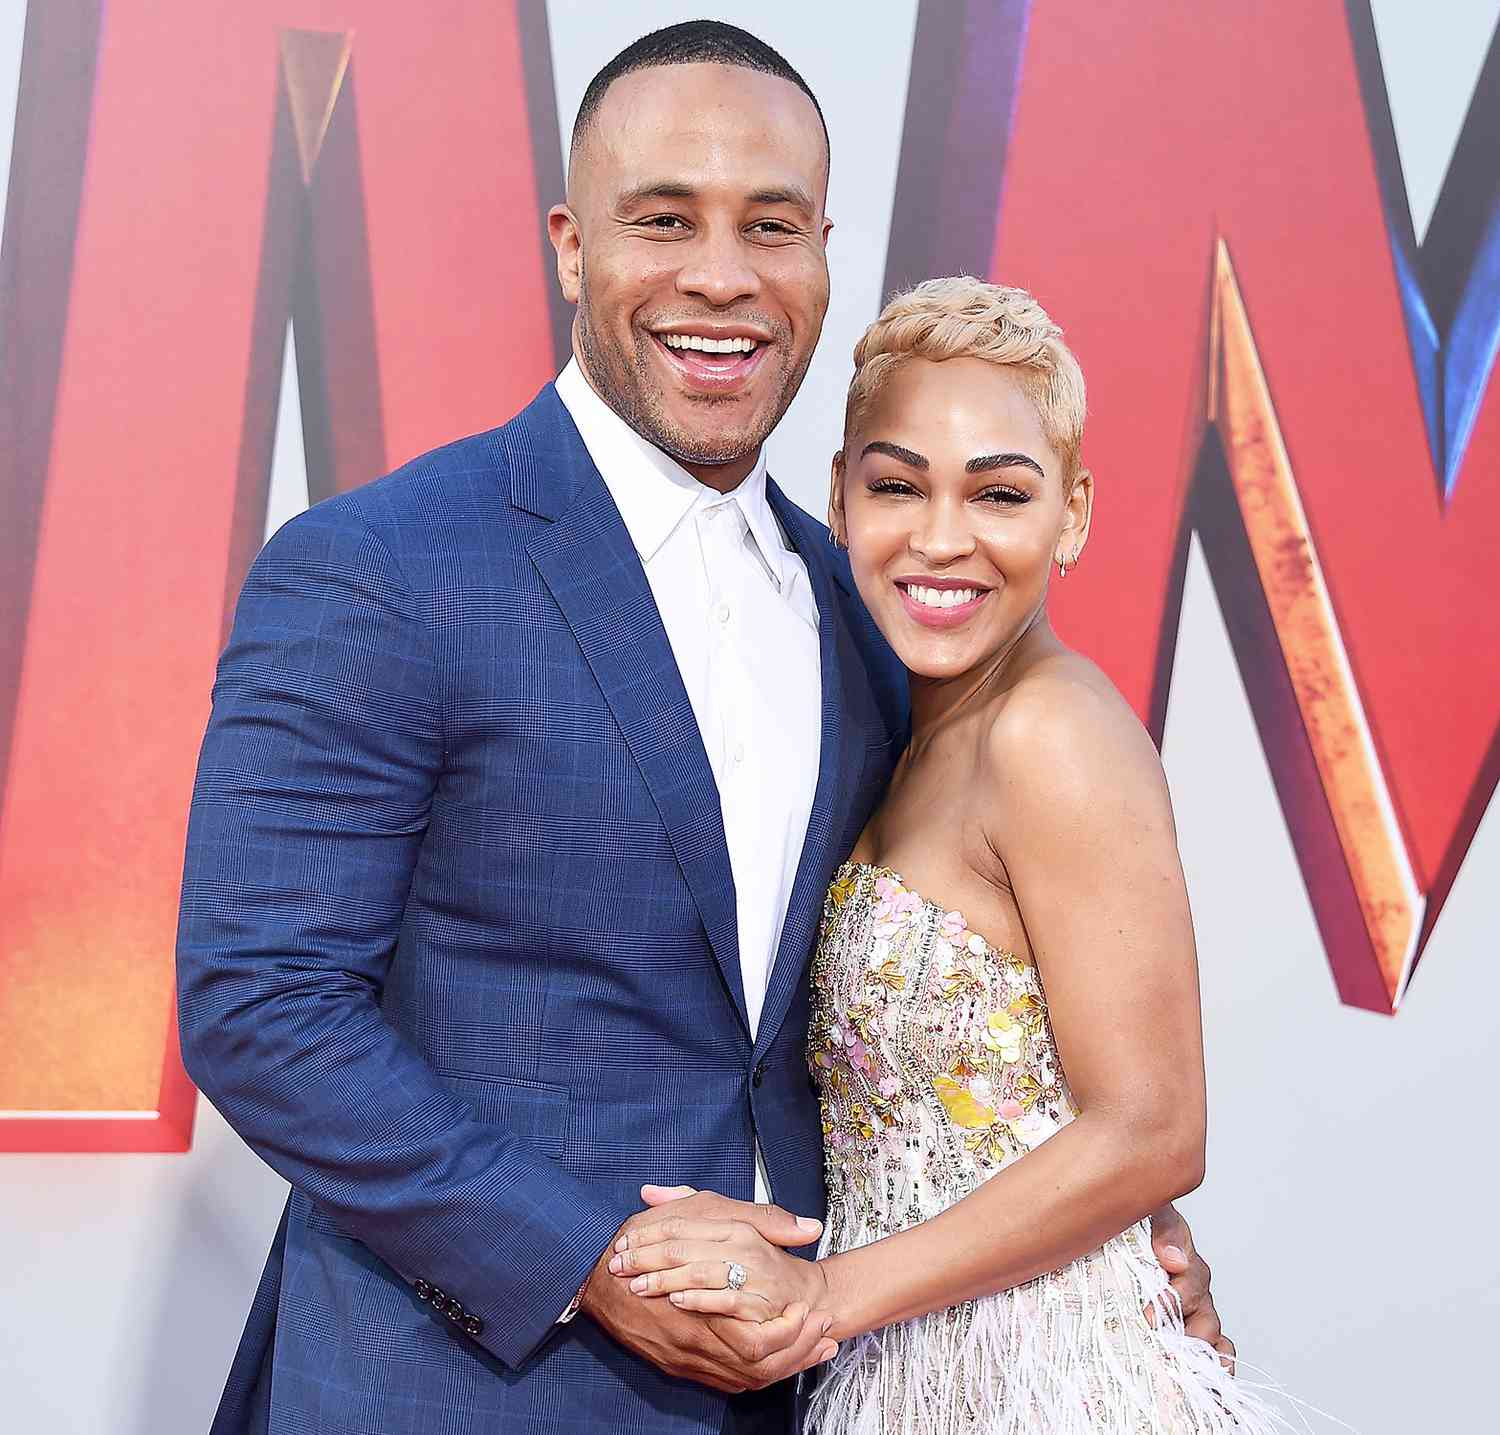 Meagan Good and Devon Franklin’s Quotes About Their Relationship [Video]